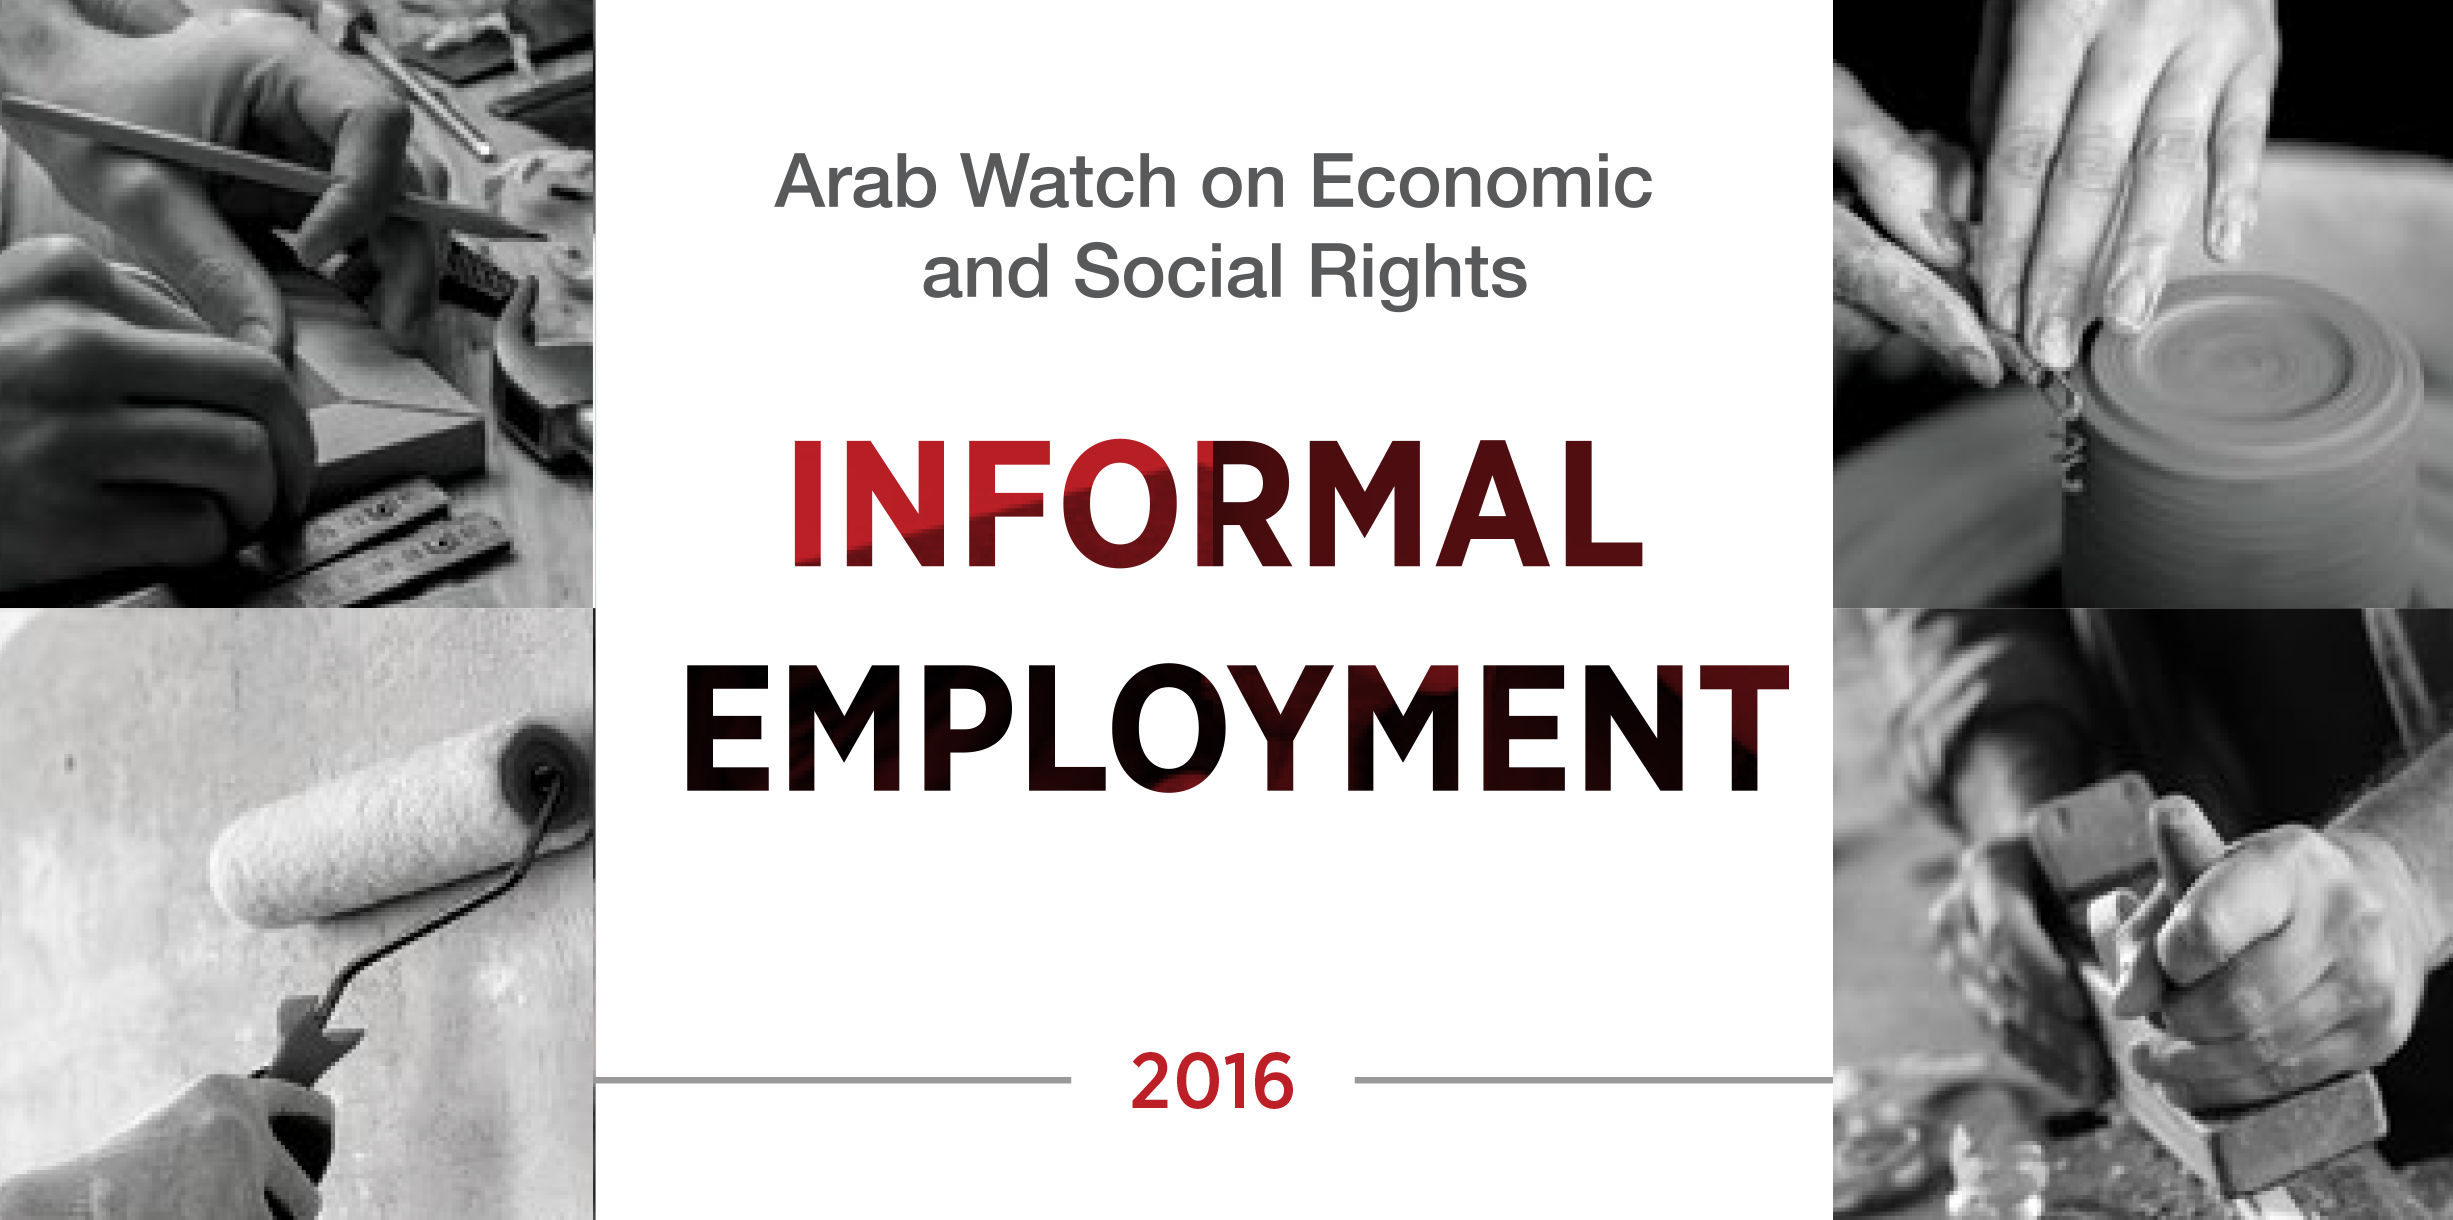 Launching of the Arab Watch Report on Informal Employment